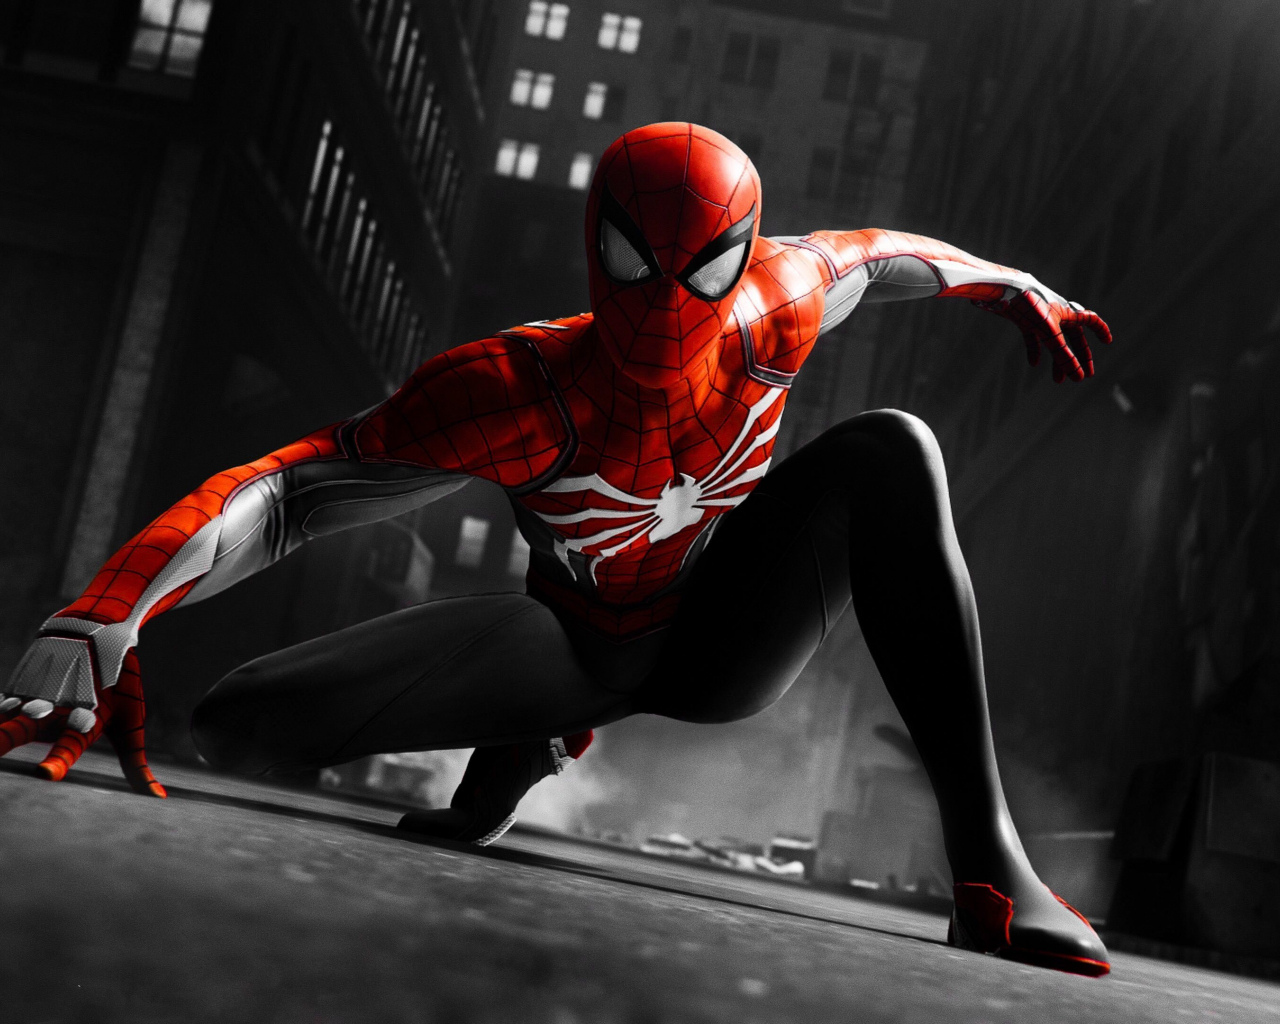 Download Wallpaper 1280x1024 Black And Red Suit Spider Man Video Game Standard 5 4 Fullscreen Wallpaper 1280x1024 Hd Background